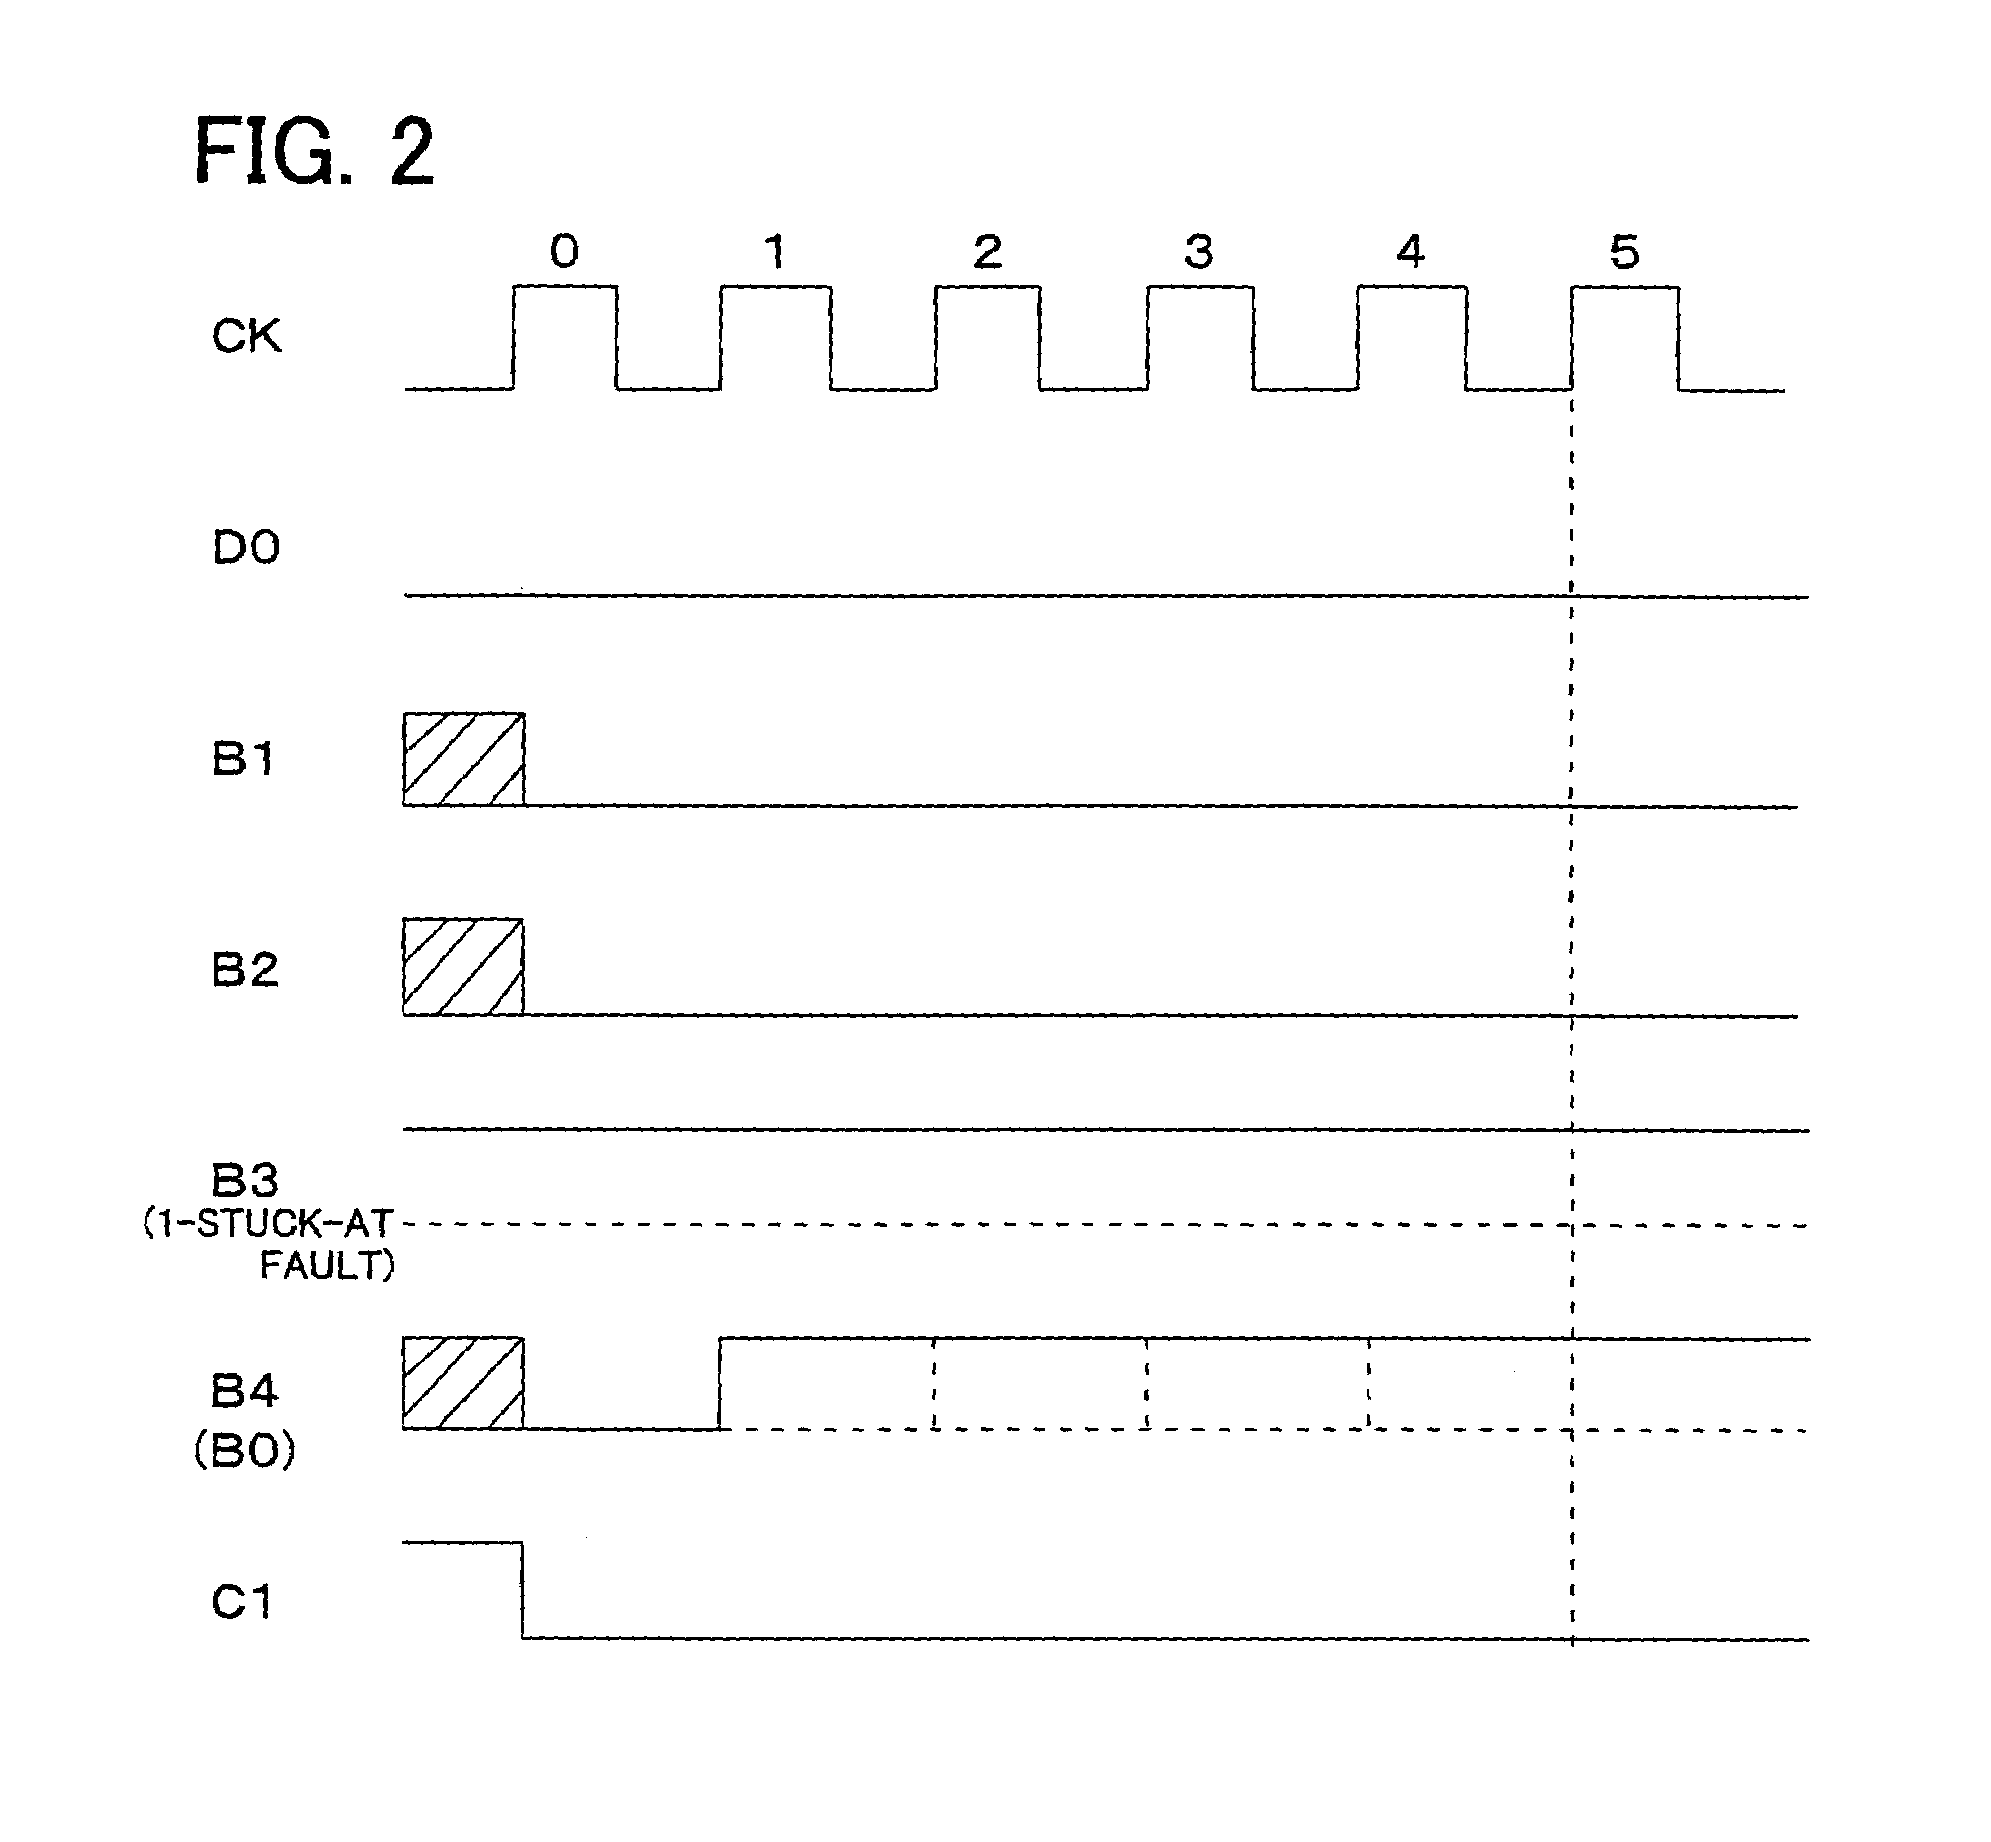 Scan-path circuit, logic circuit including the same, and method for testing integrated circuit